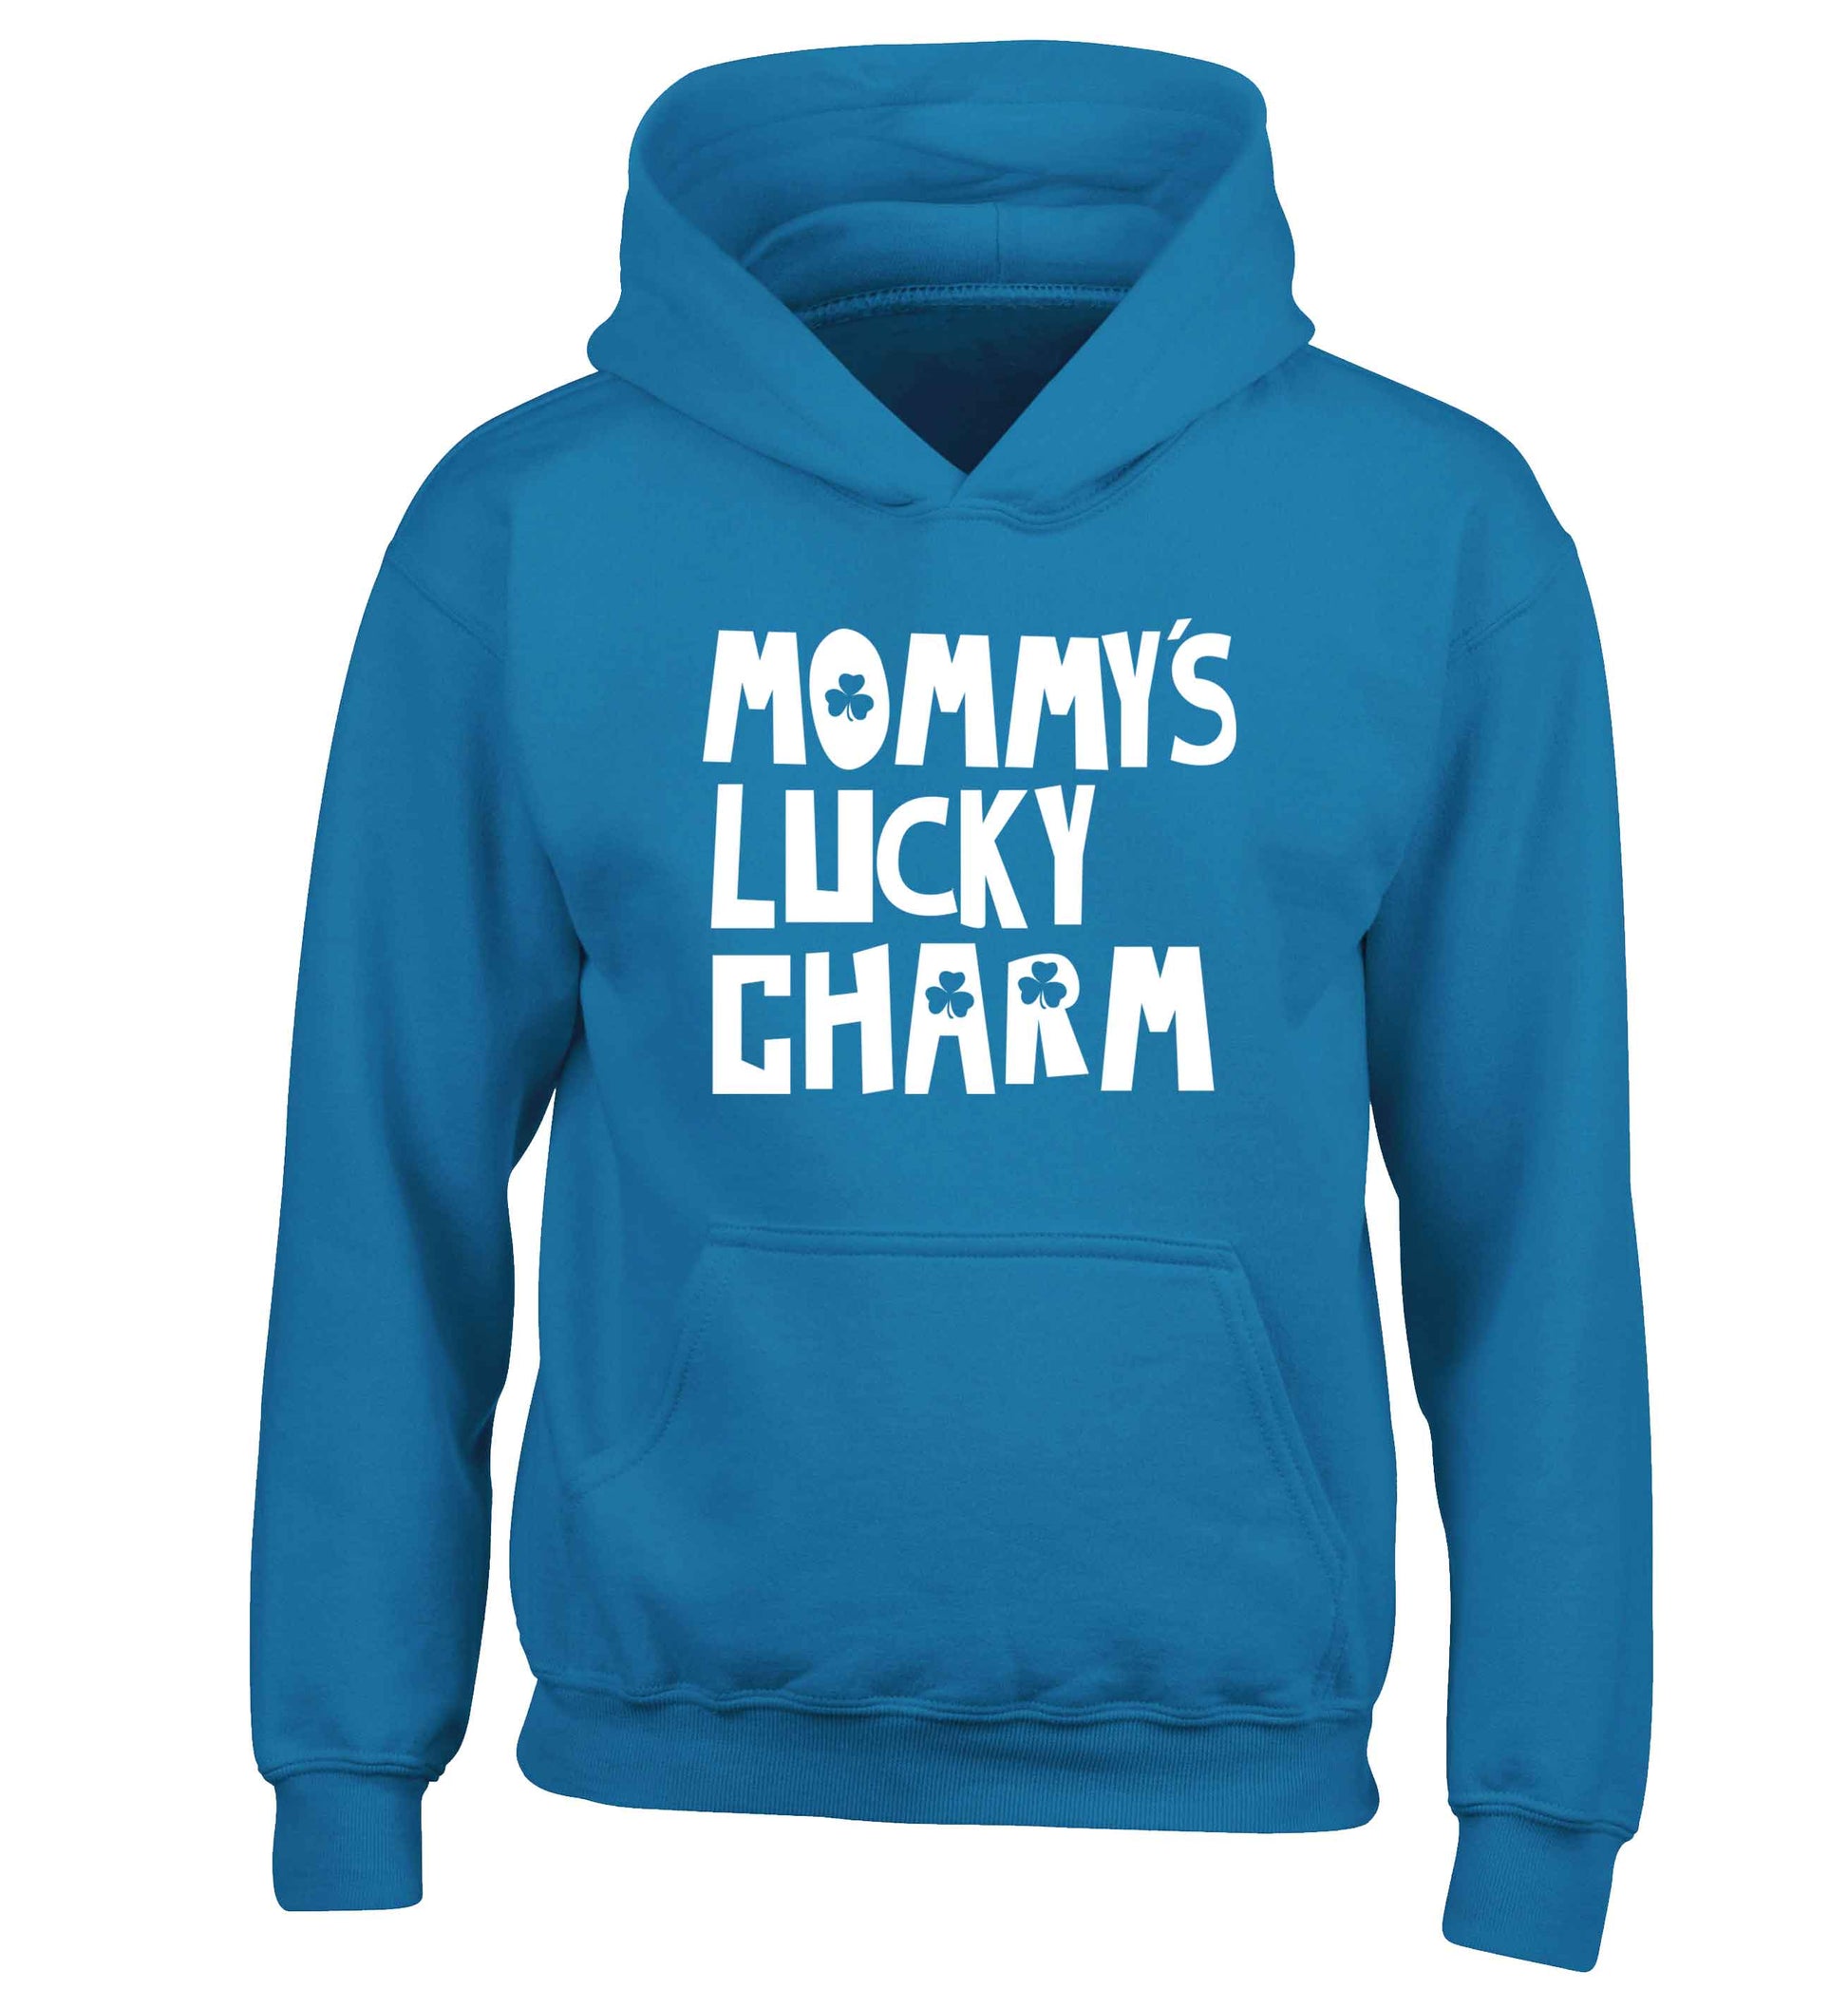 Mommy's lucky charm children's blue hoodie 12-13 Years